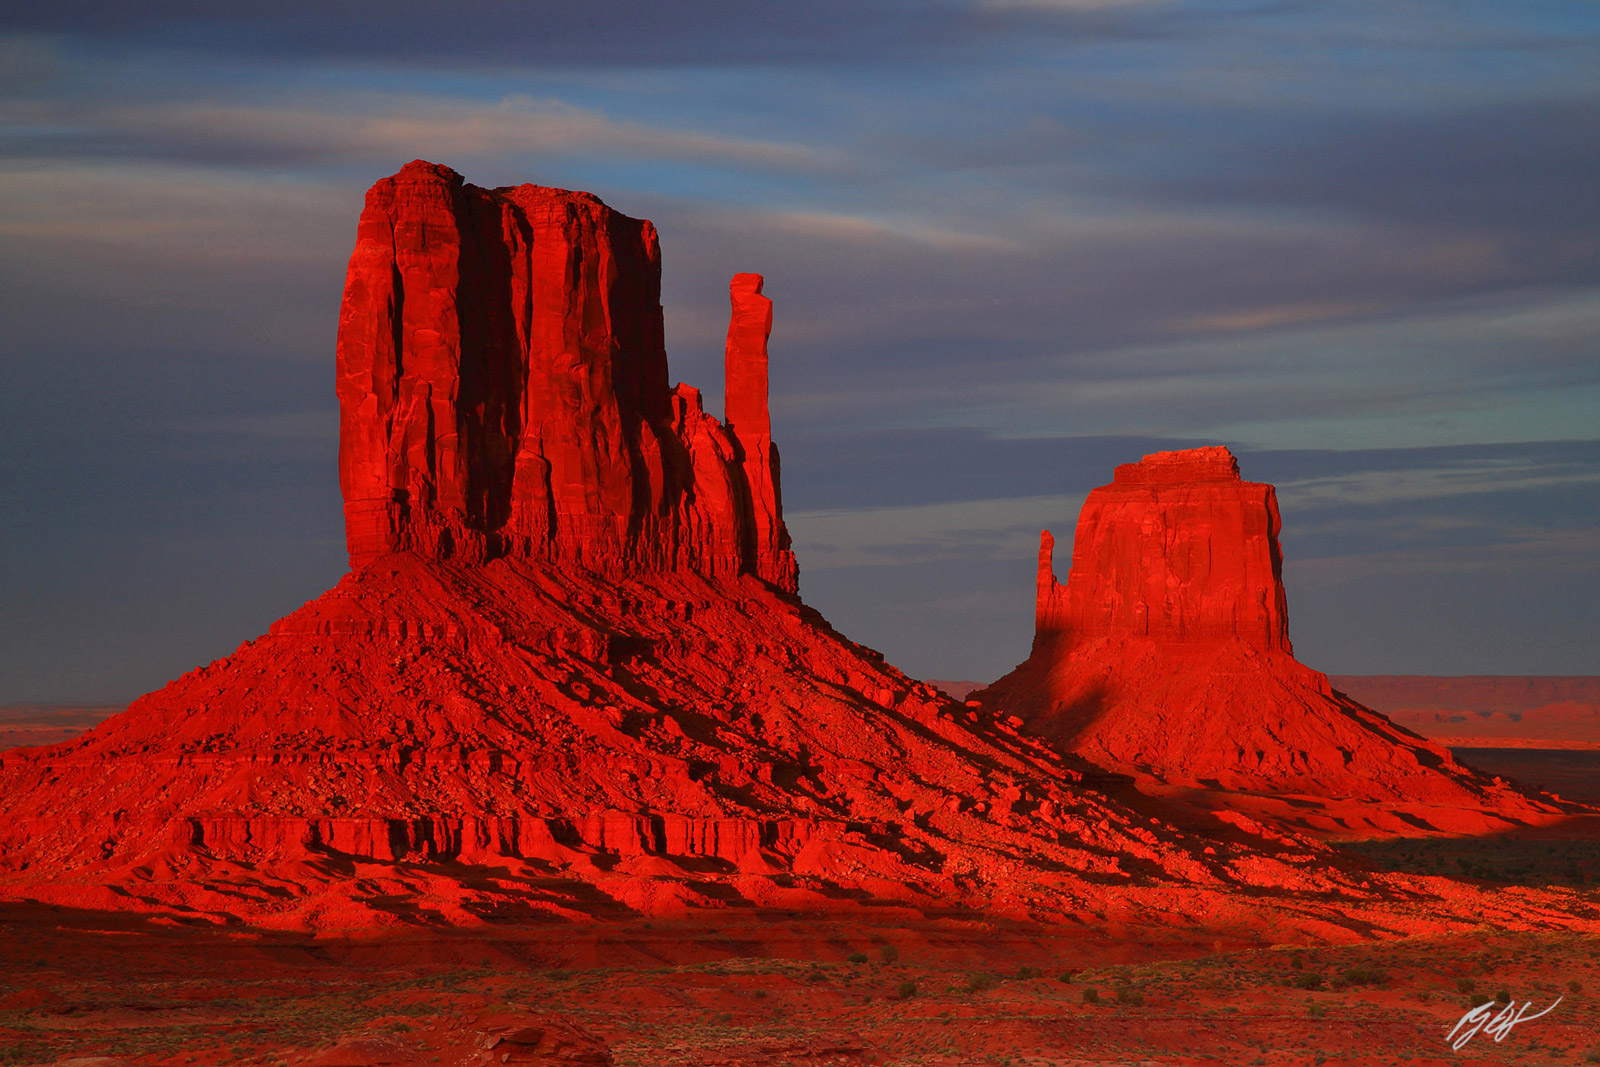 Sunset on the Mittens in Monument Valley from Monument Valley Navajo Tribal Park in Utah